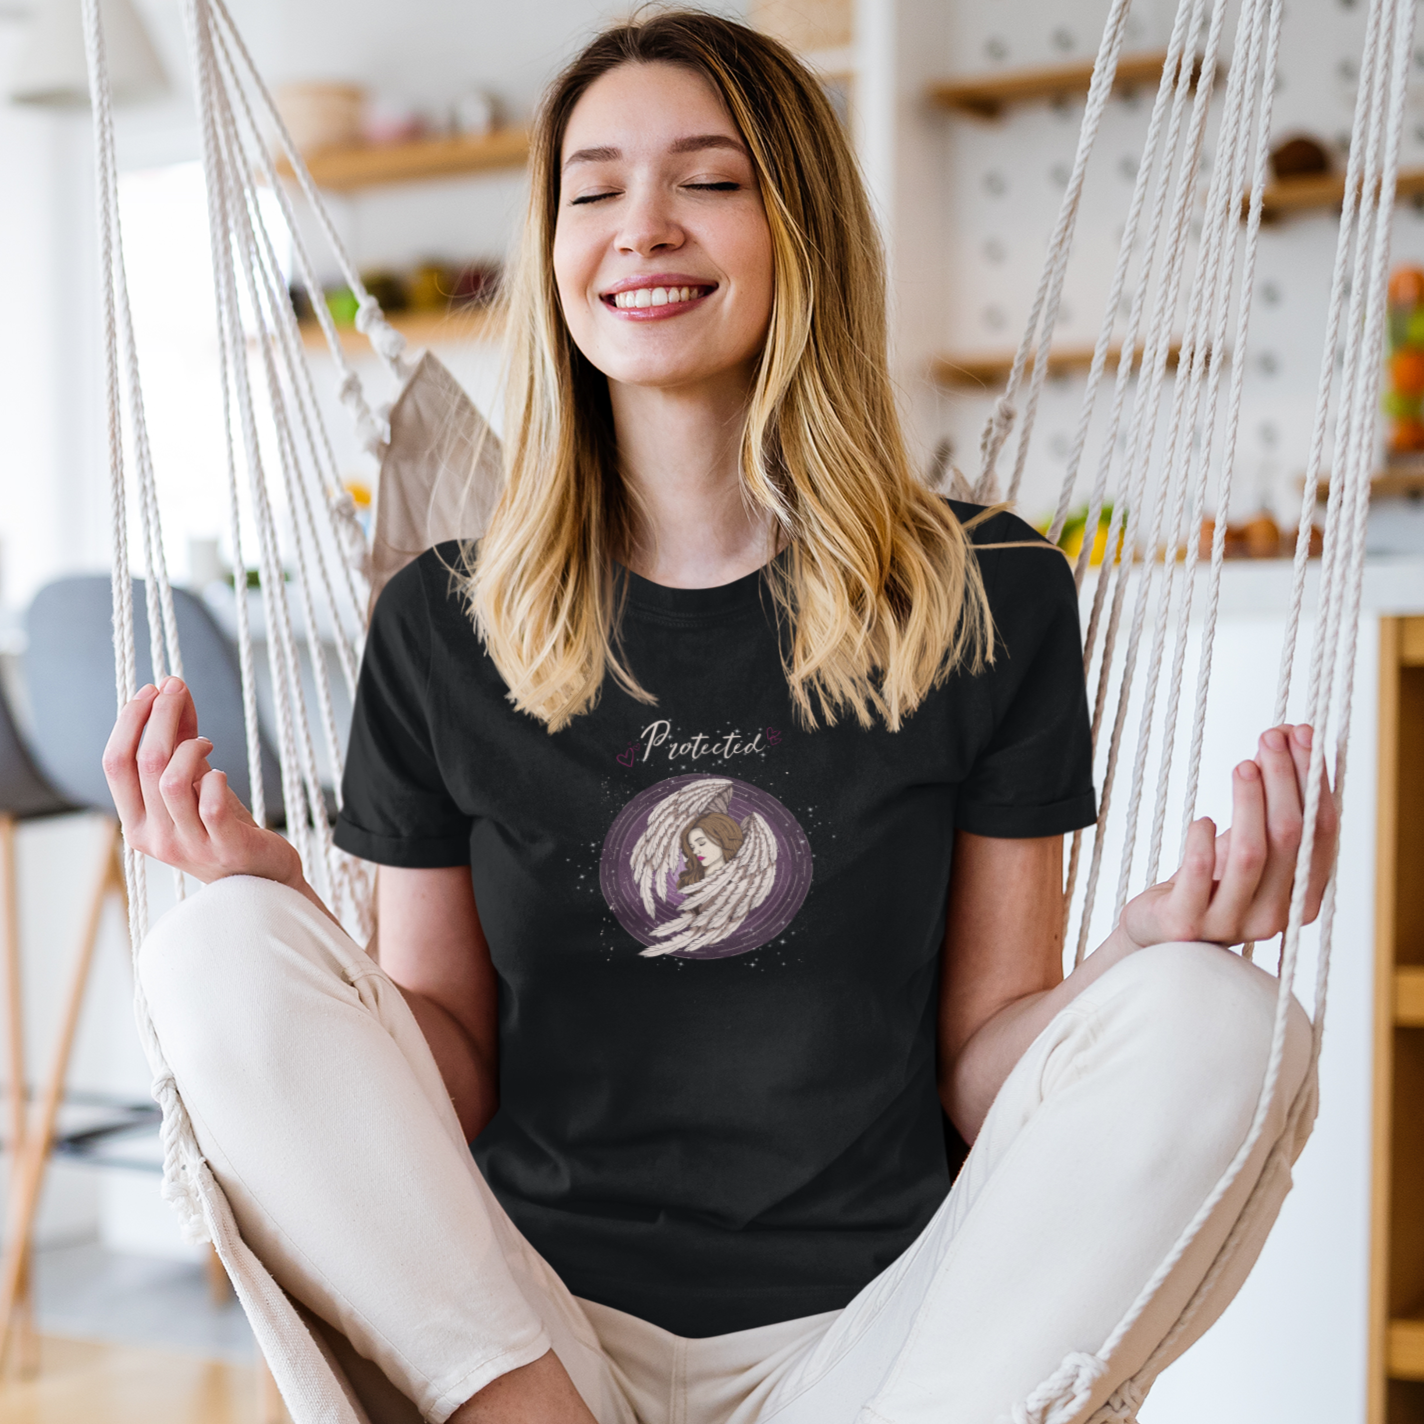 Story of Awakening Lifestyle Community Spirituality Relationships Love Light Meditation Oneness Earth Balance Healing Shop Store Charity Tree Nature Read Write T shirt Tops Tees Clothing Women Horoscope Organic Cotton Protected Guardian Angel Wings Quote